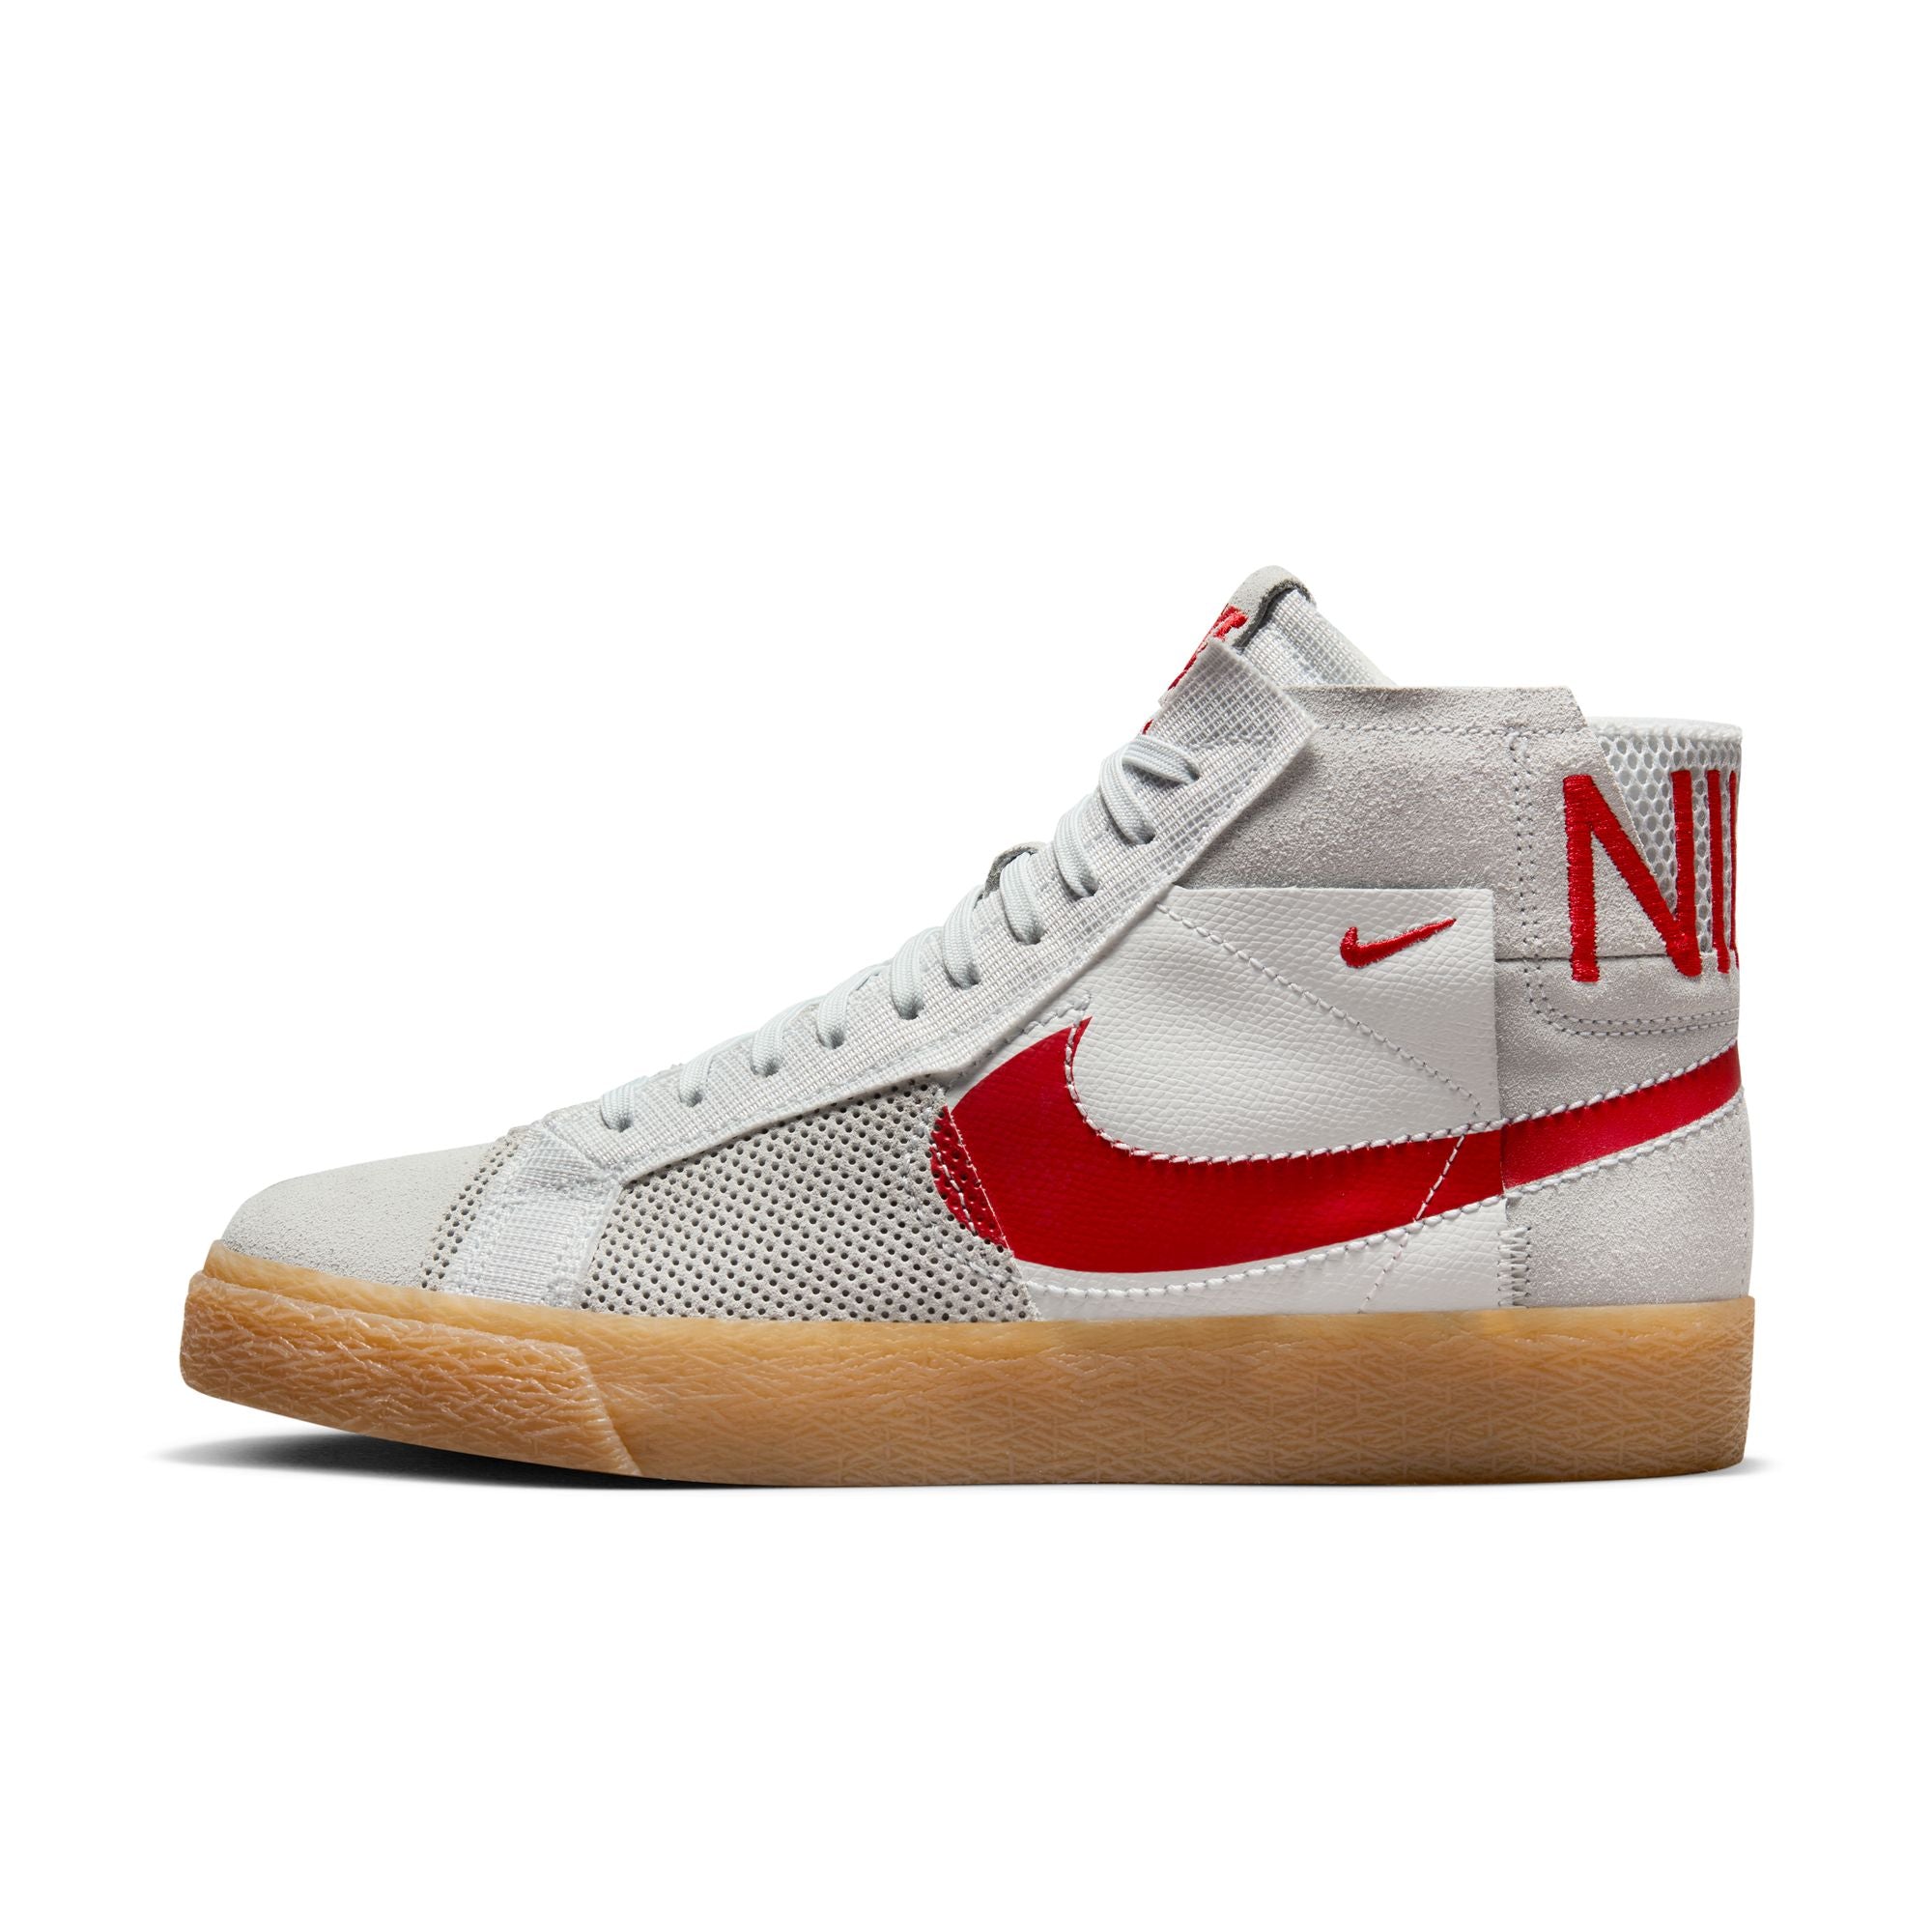 Nike Blazer Mid Sneakers in White and Red